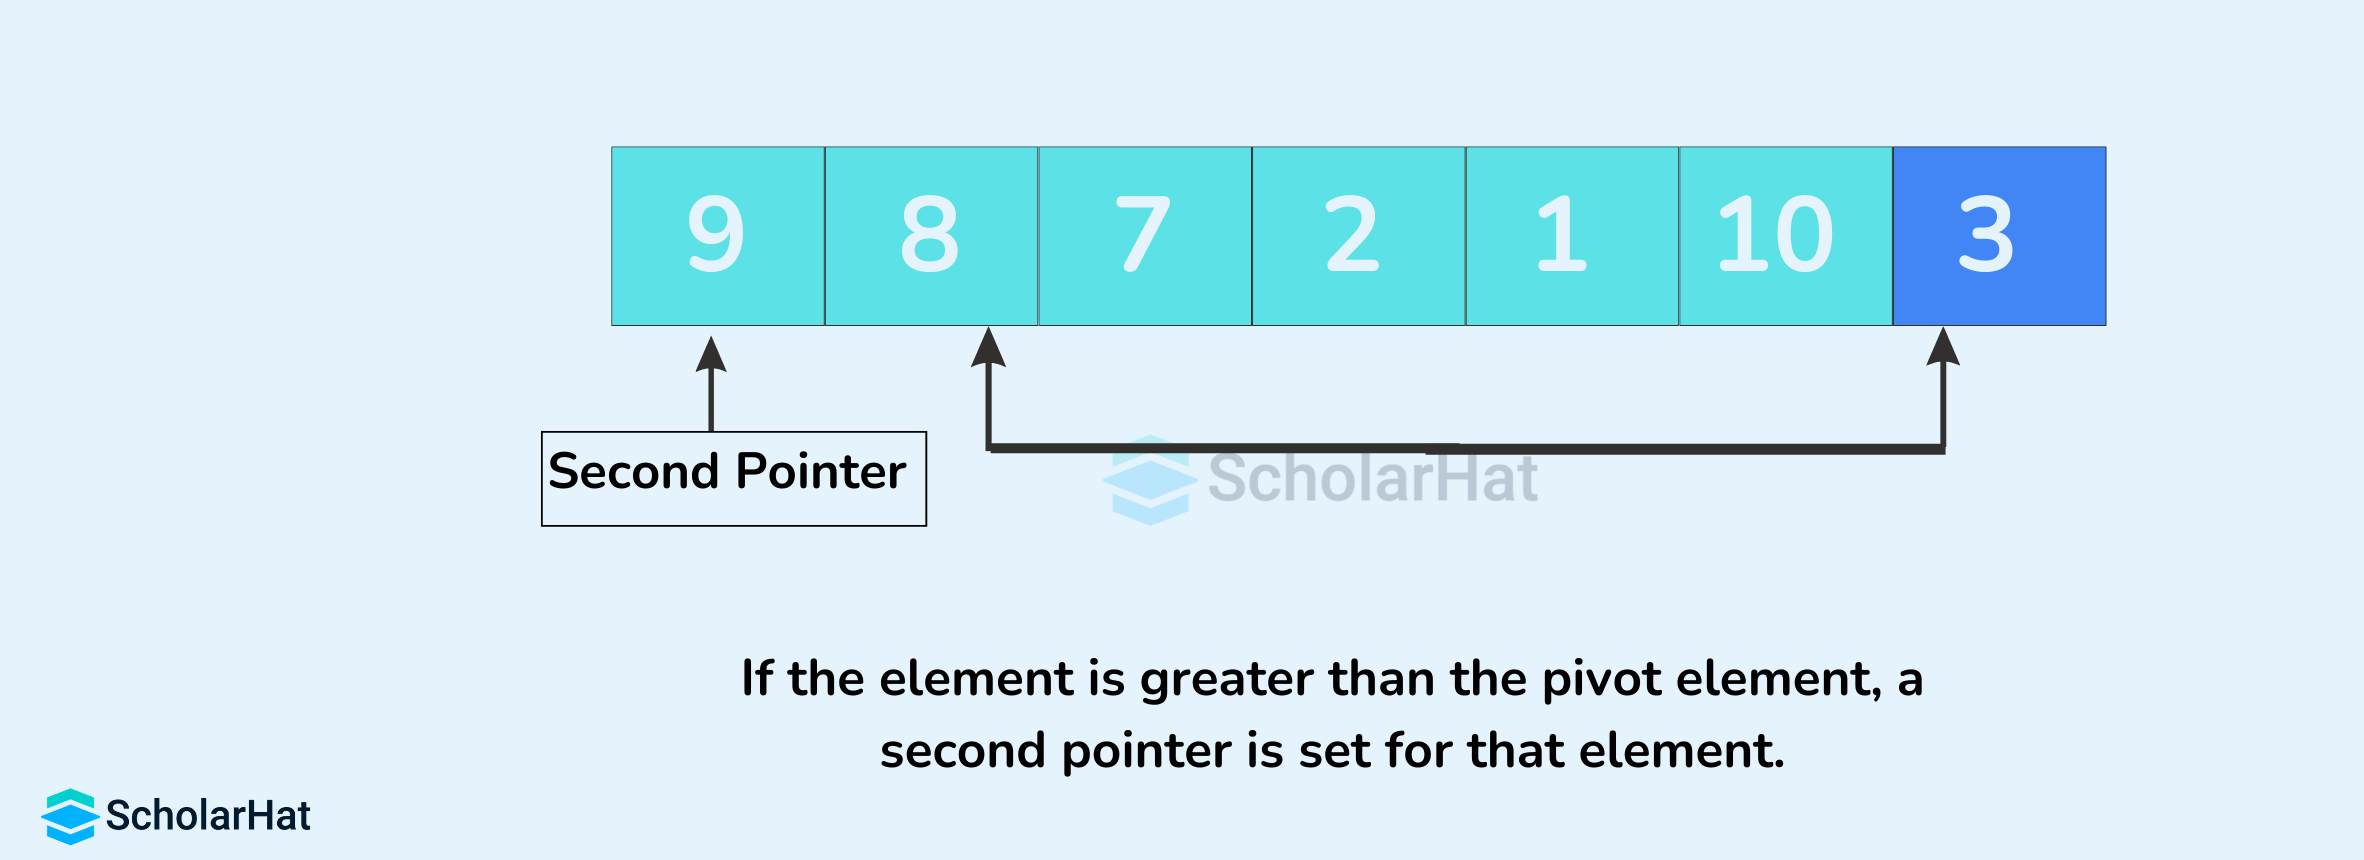 If the element is greater than the pivot element, a second pointer is set for that element.